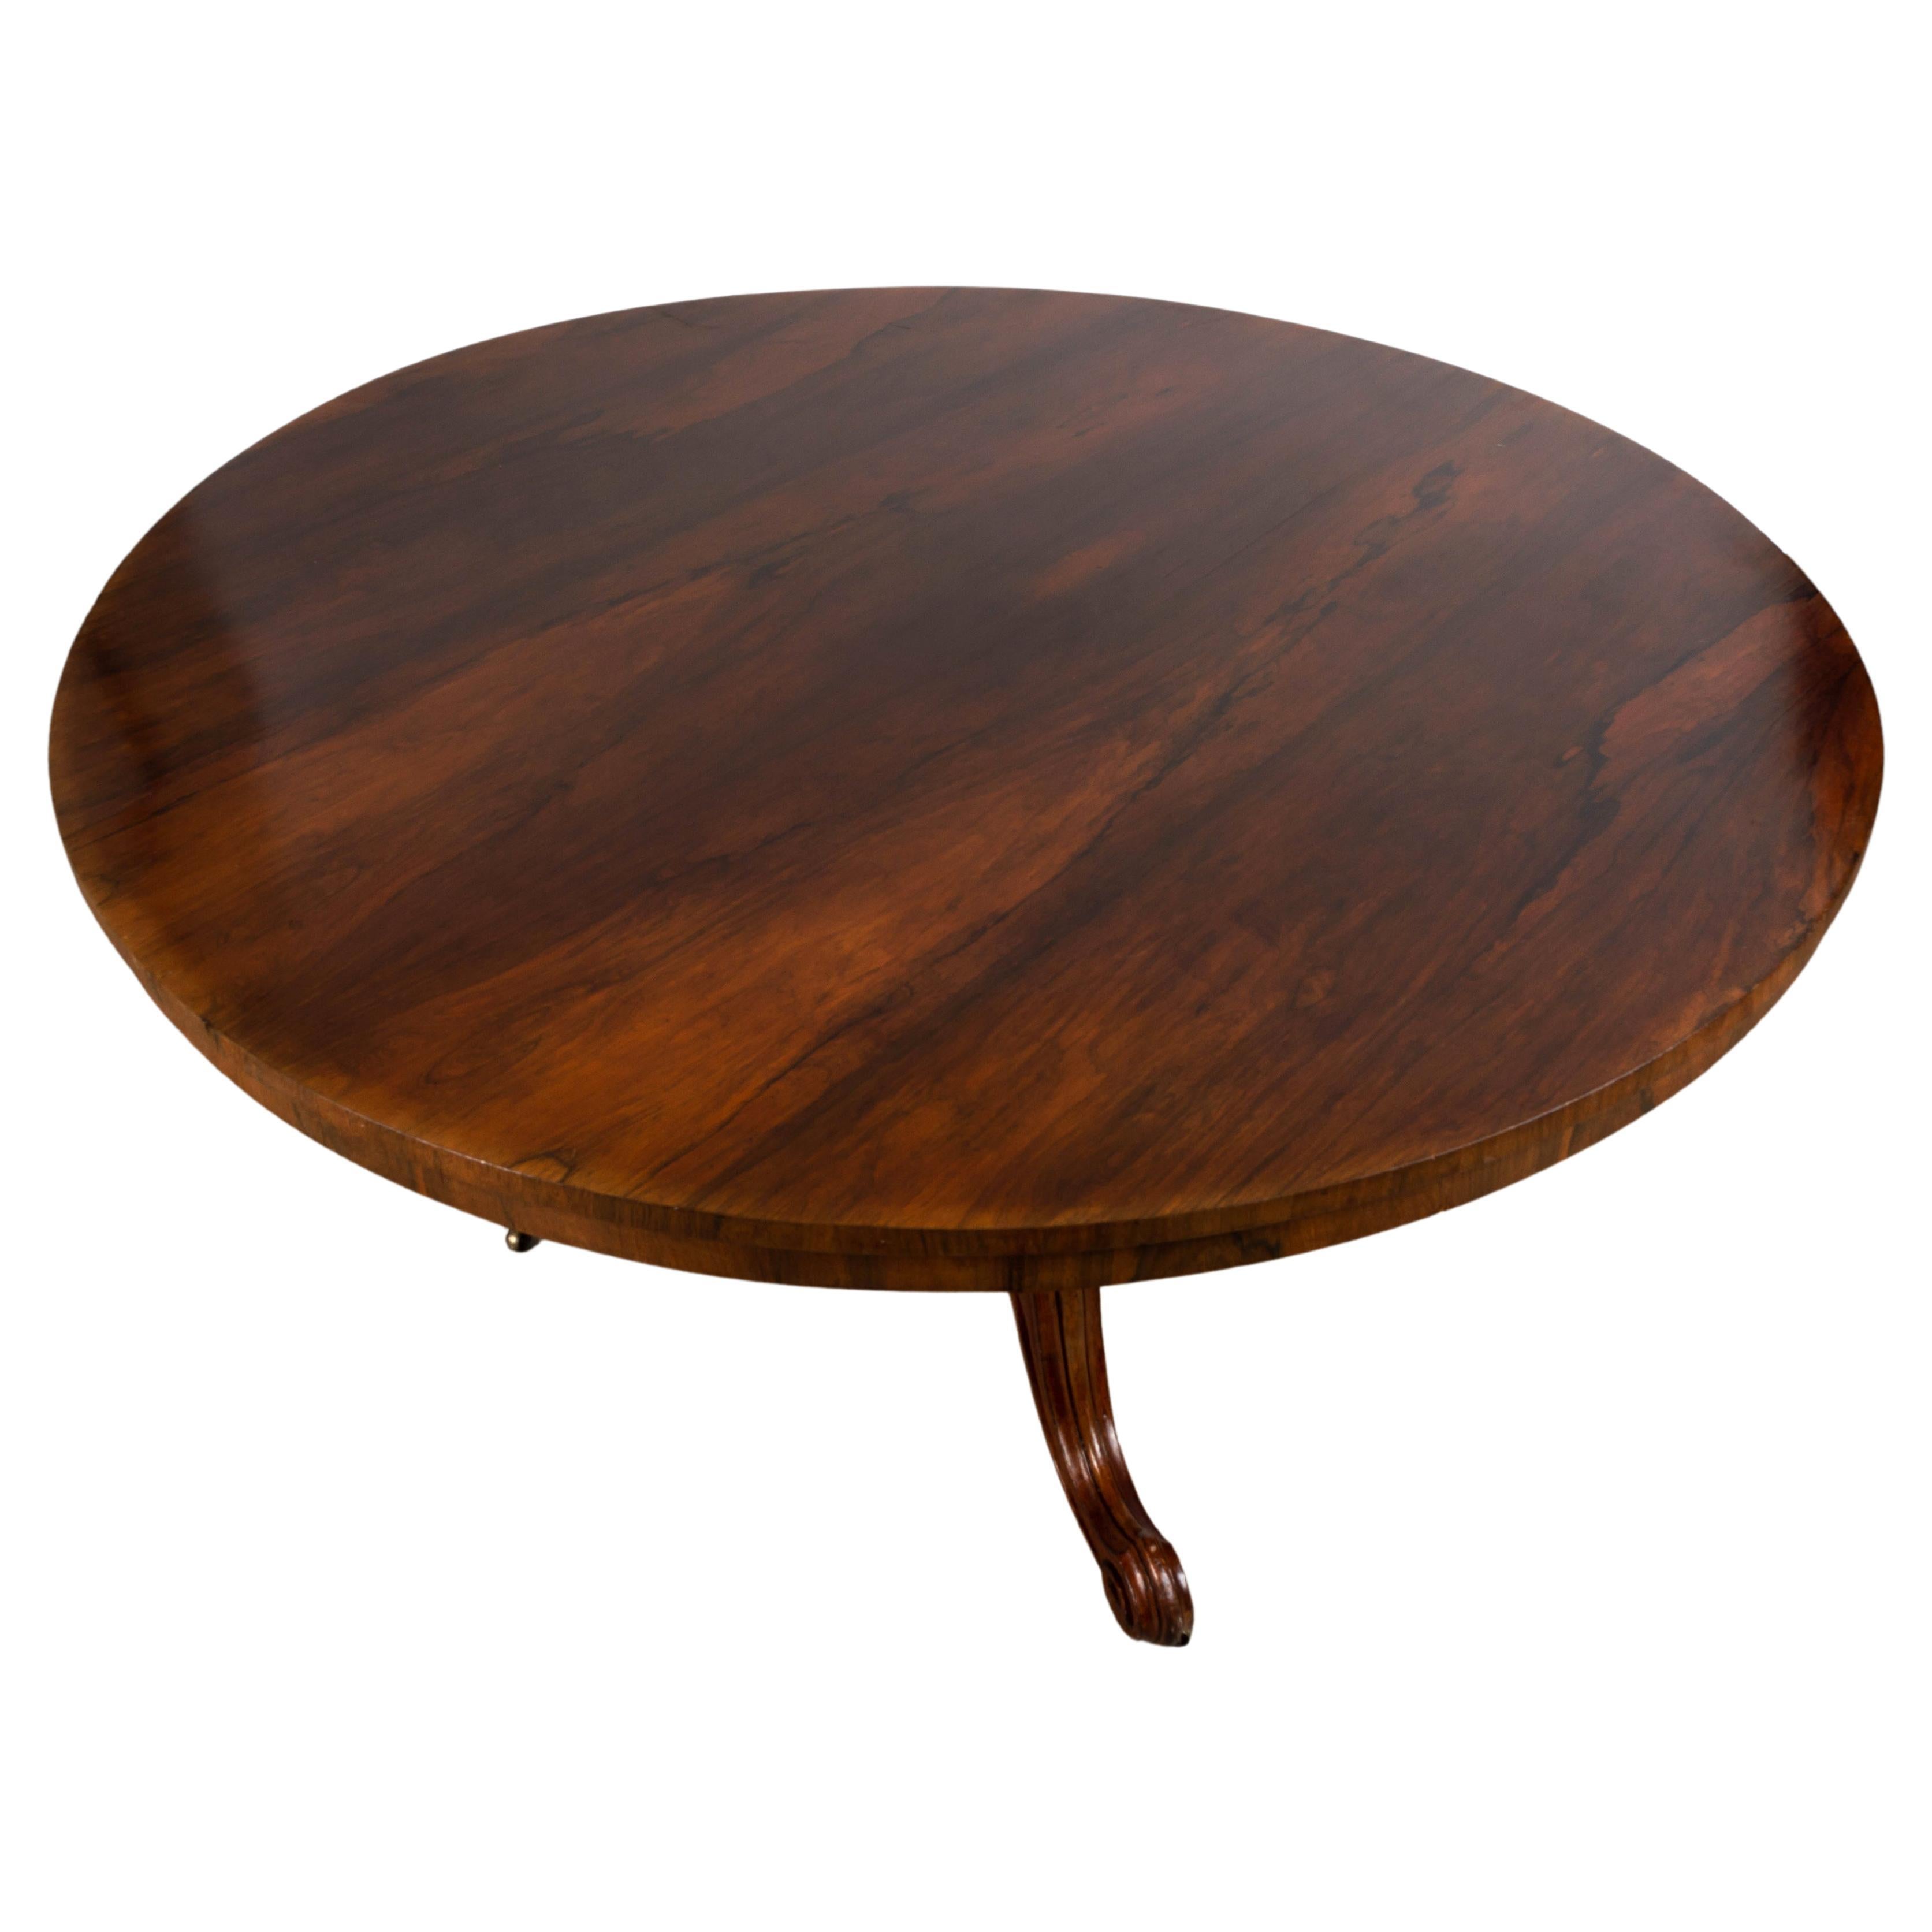 English 19th century Regency rosewood tilt top centre table, c.1830

A striking Regency rosewood tilt top centre/dining table. 
Standing on a bulbous pedestal and splayed cabriole legs terminating in castors. Of generous proportions, to seat six